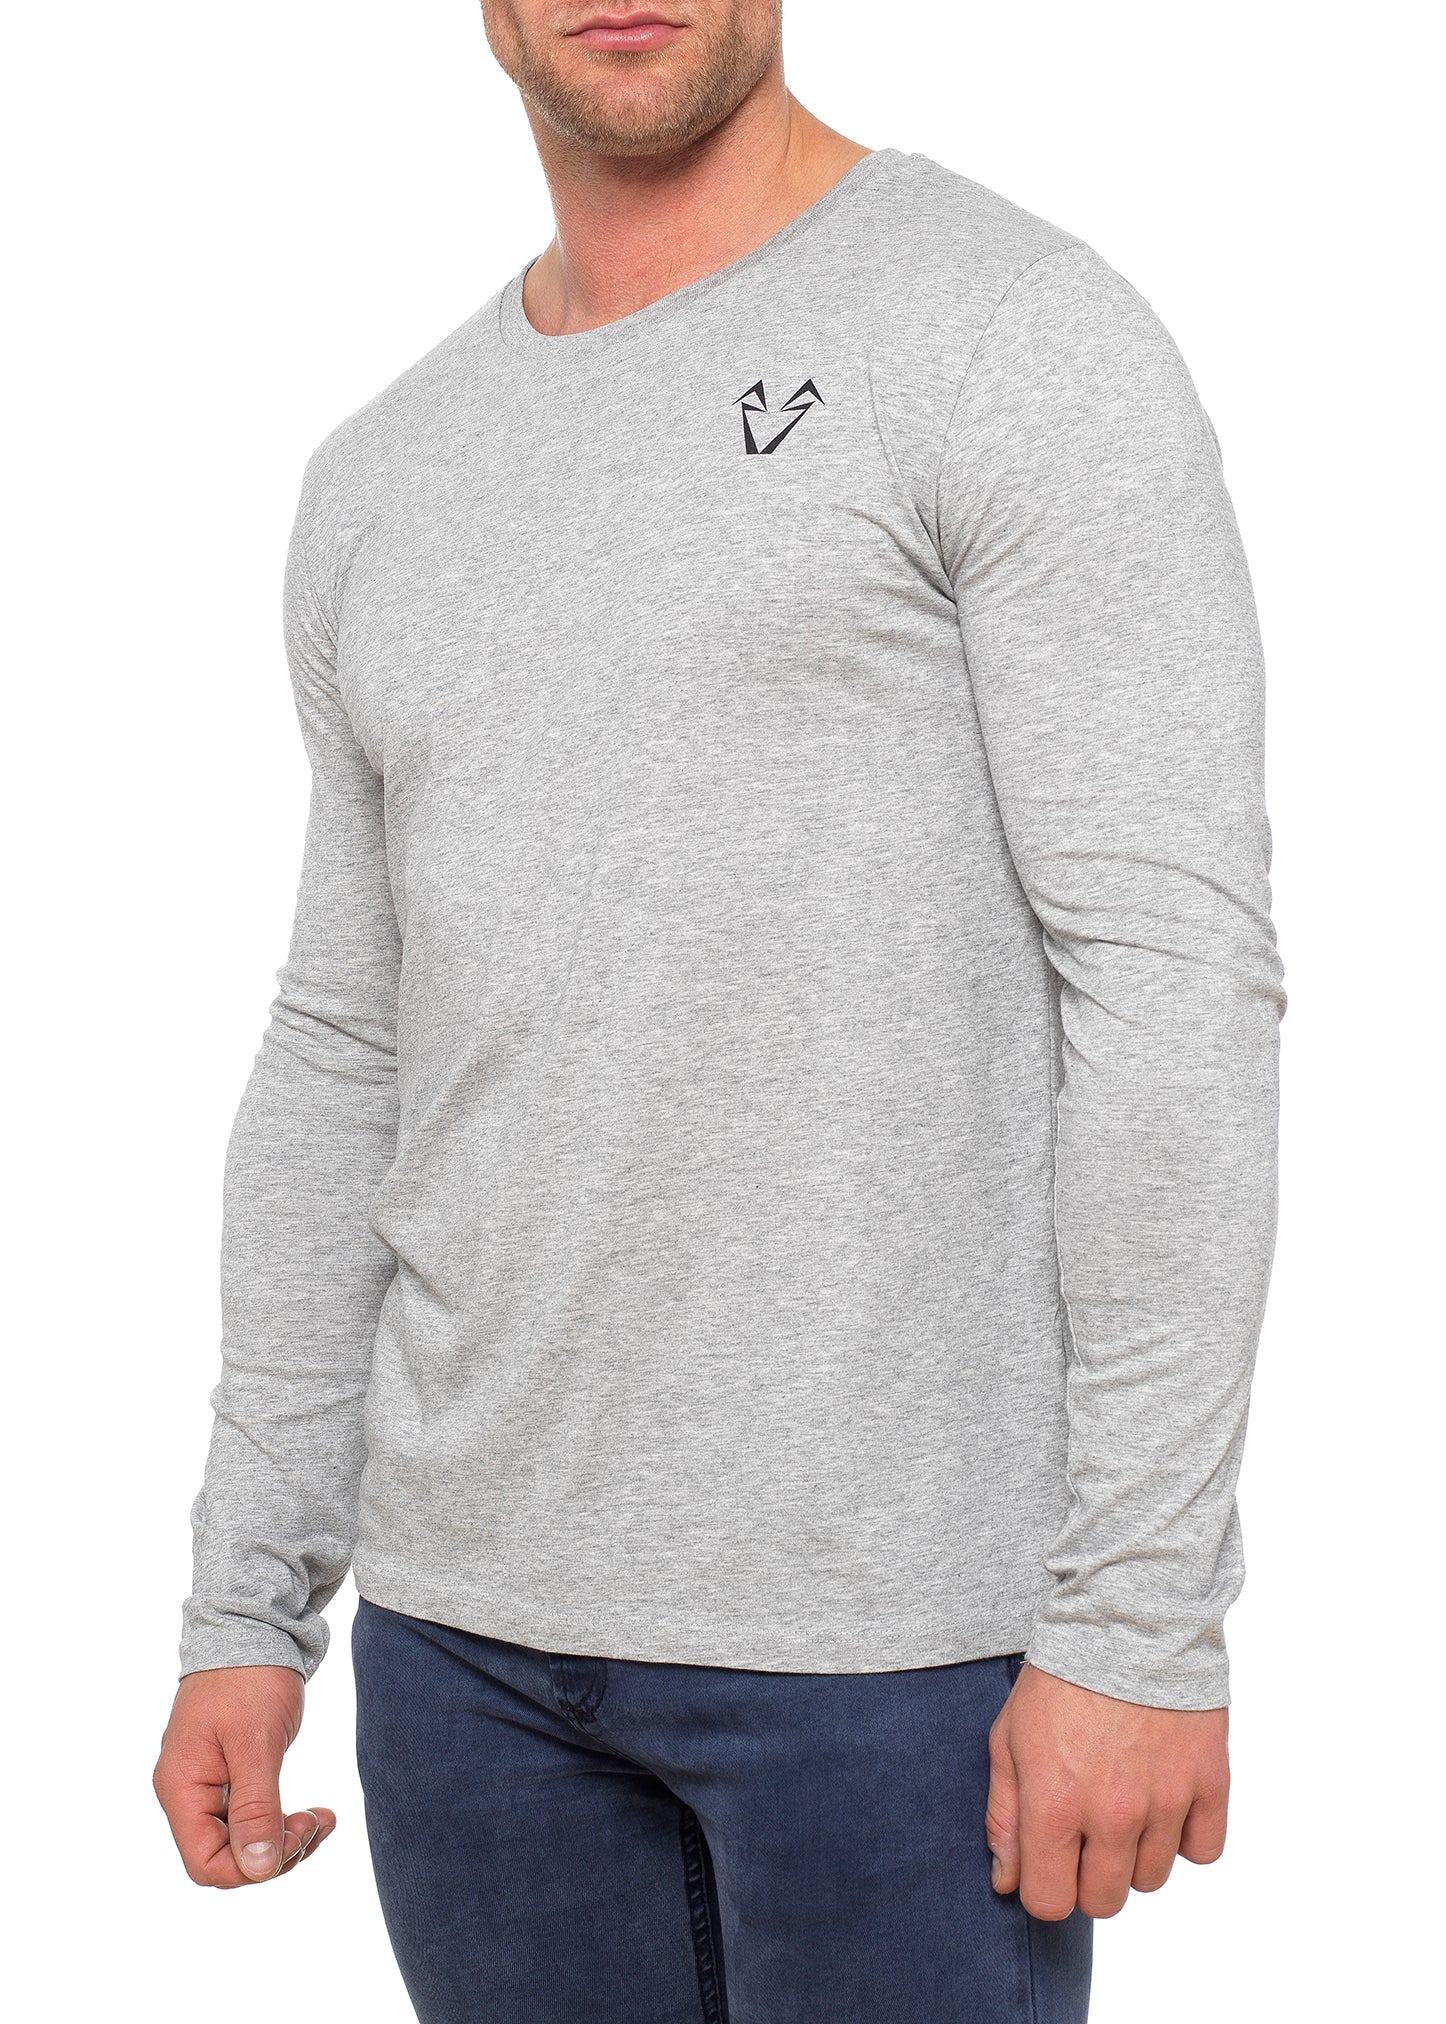 Mens Muscle Fit Long Sleeve T Shirts